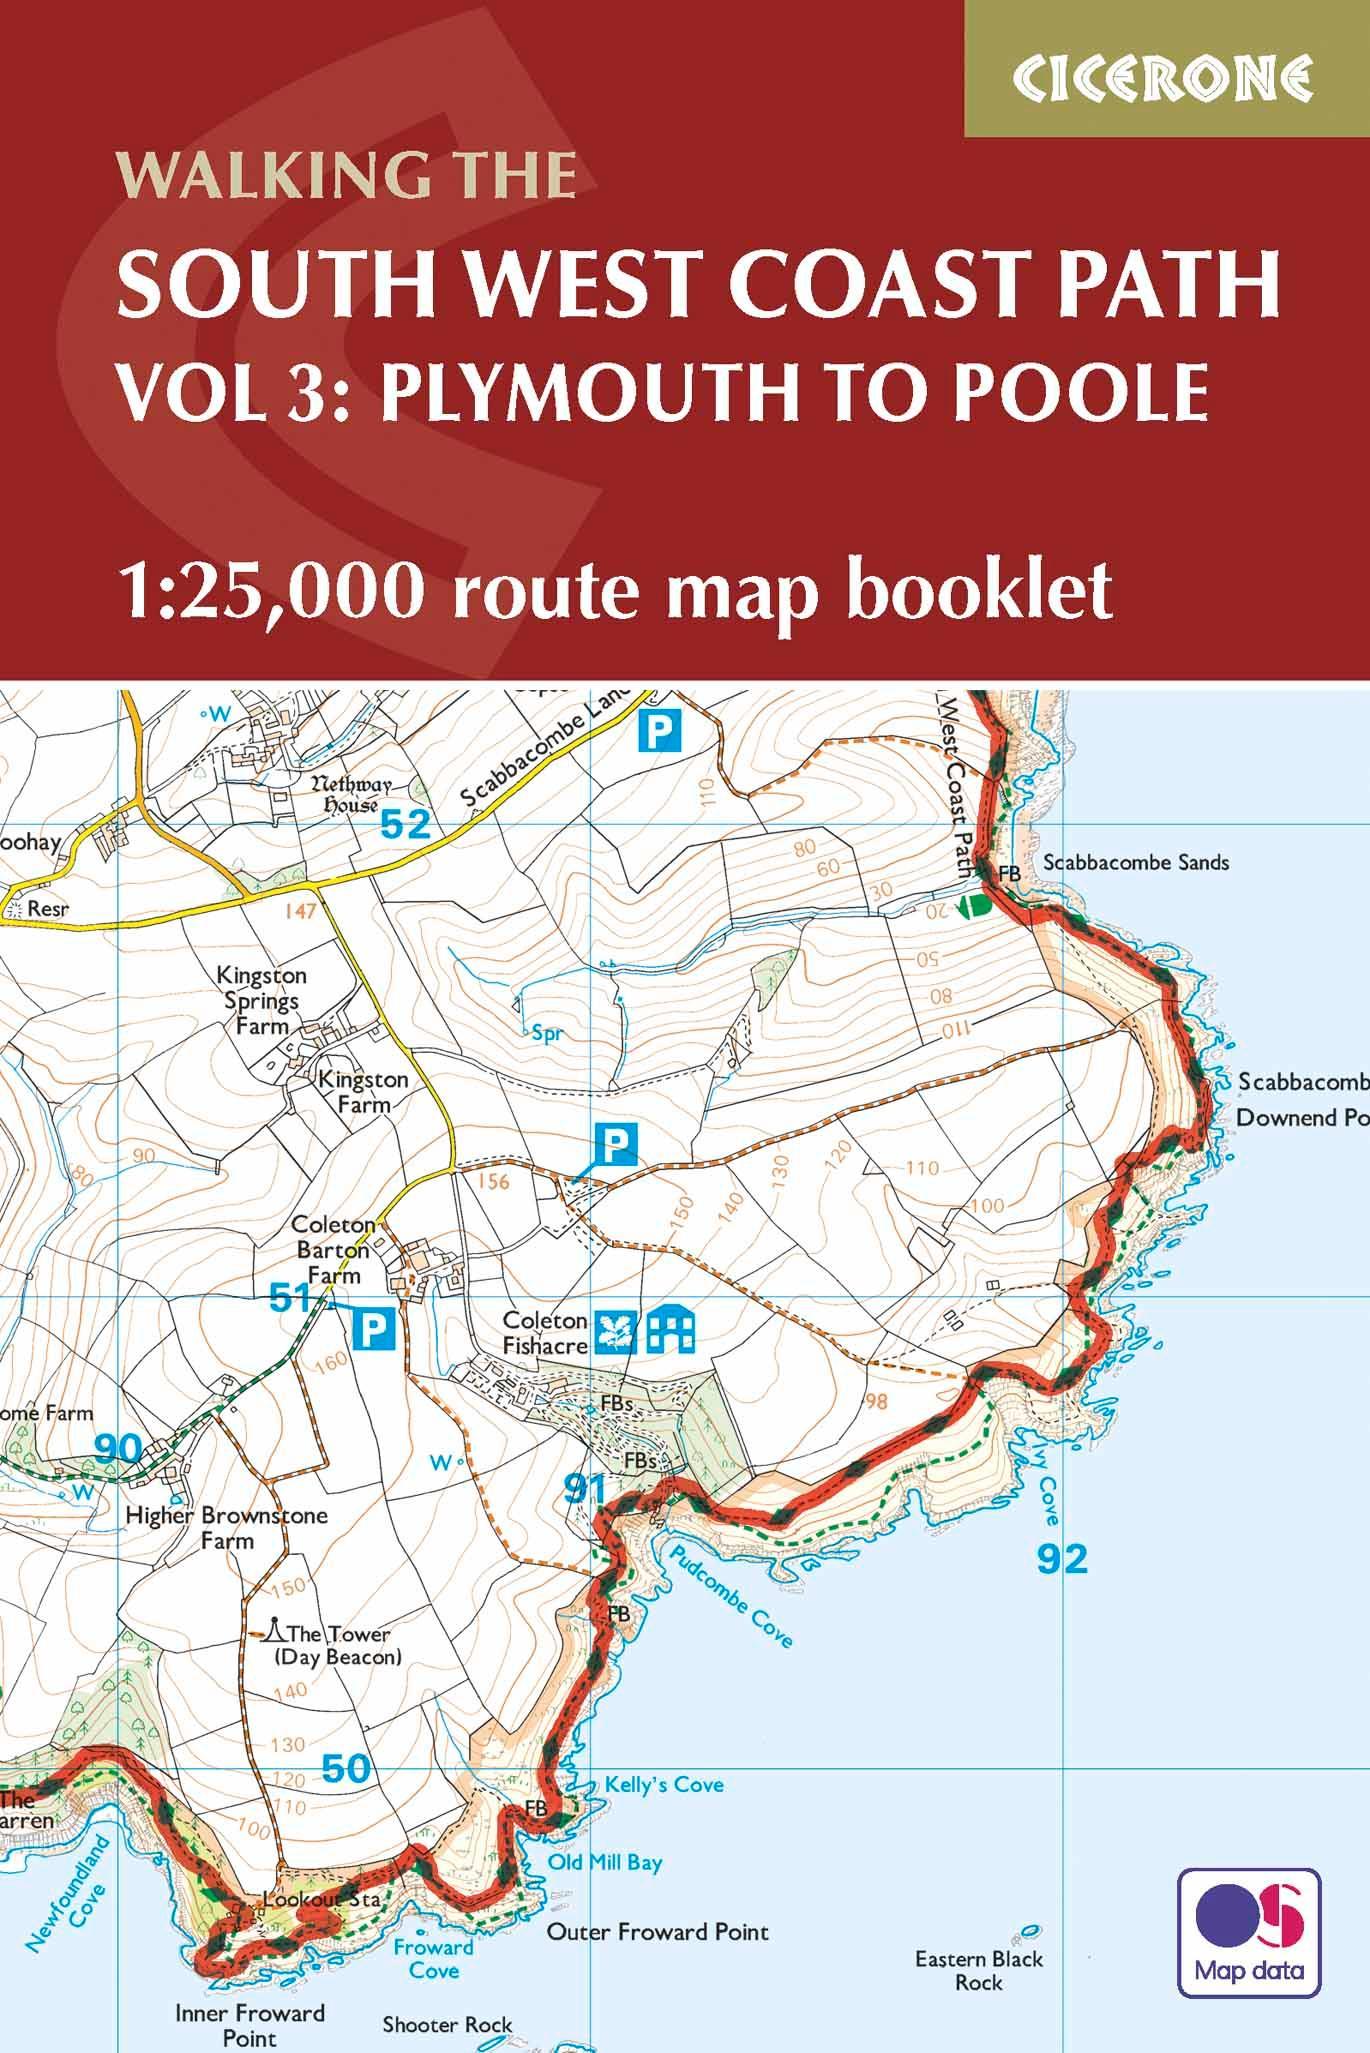 South West Coast Path Map Booklet - Vol 3: Plymouth to Poole - Paddy Dillon